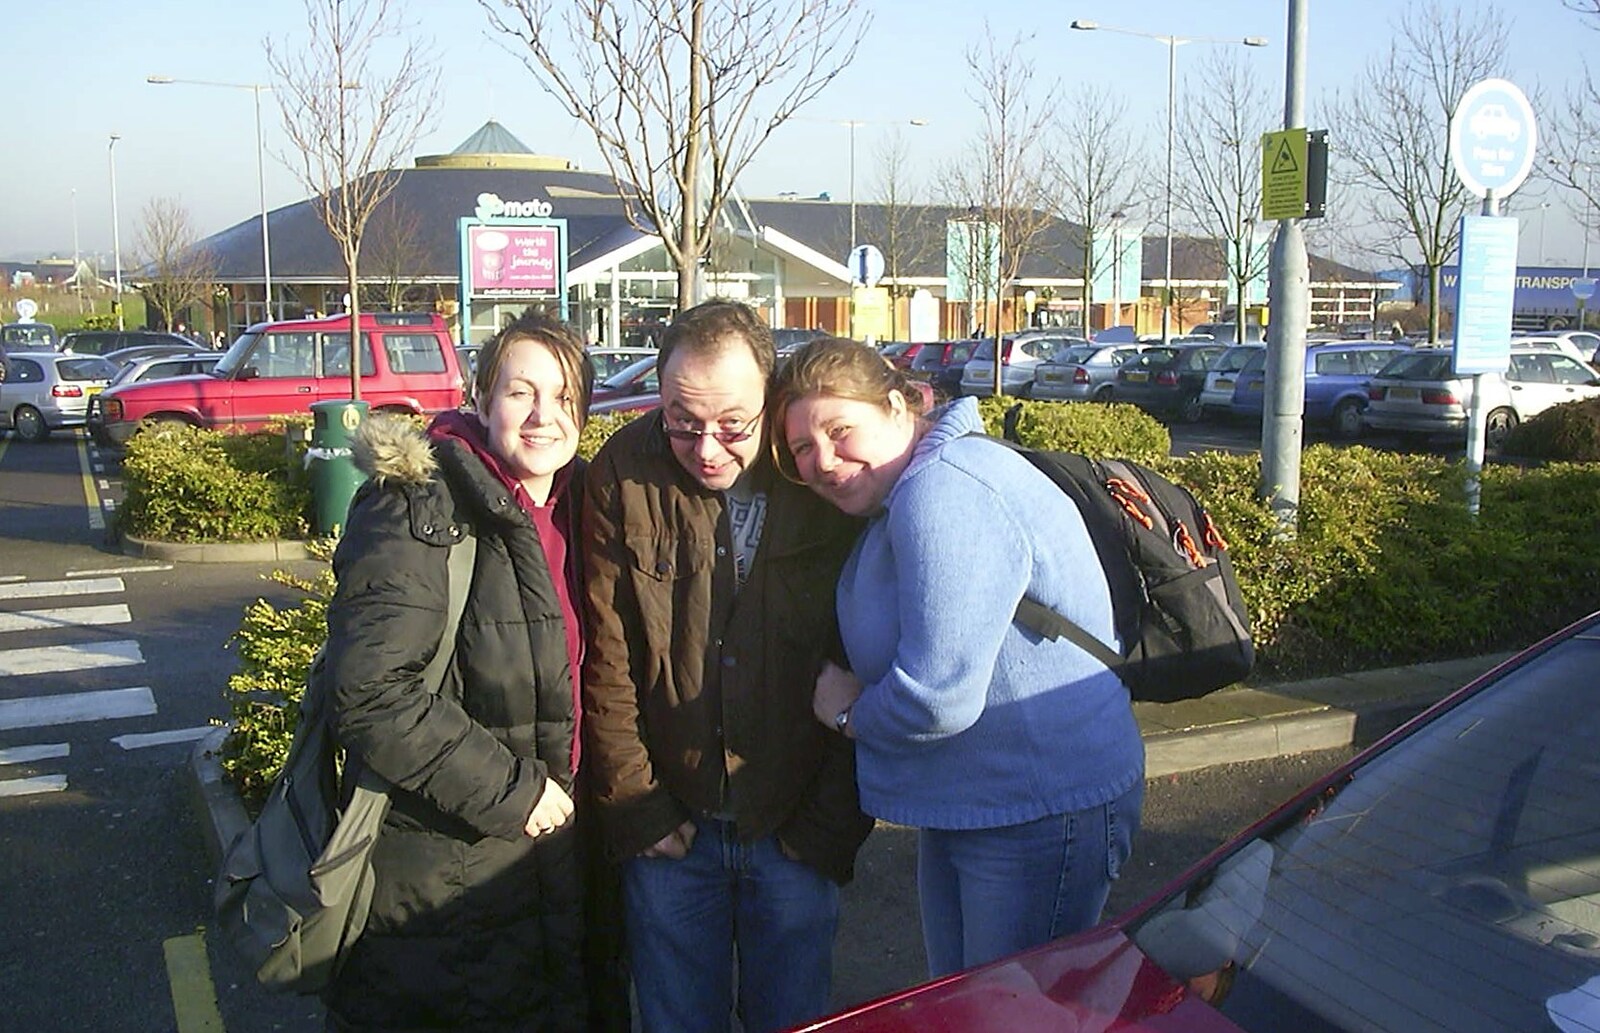 Debs, Matt and Sis at Moto services on the M4 from A Trip to Plymouth, Devon - 18th December 2003